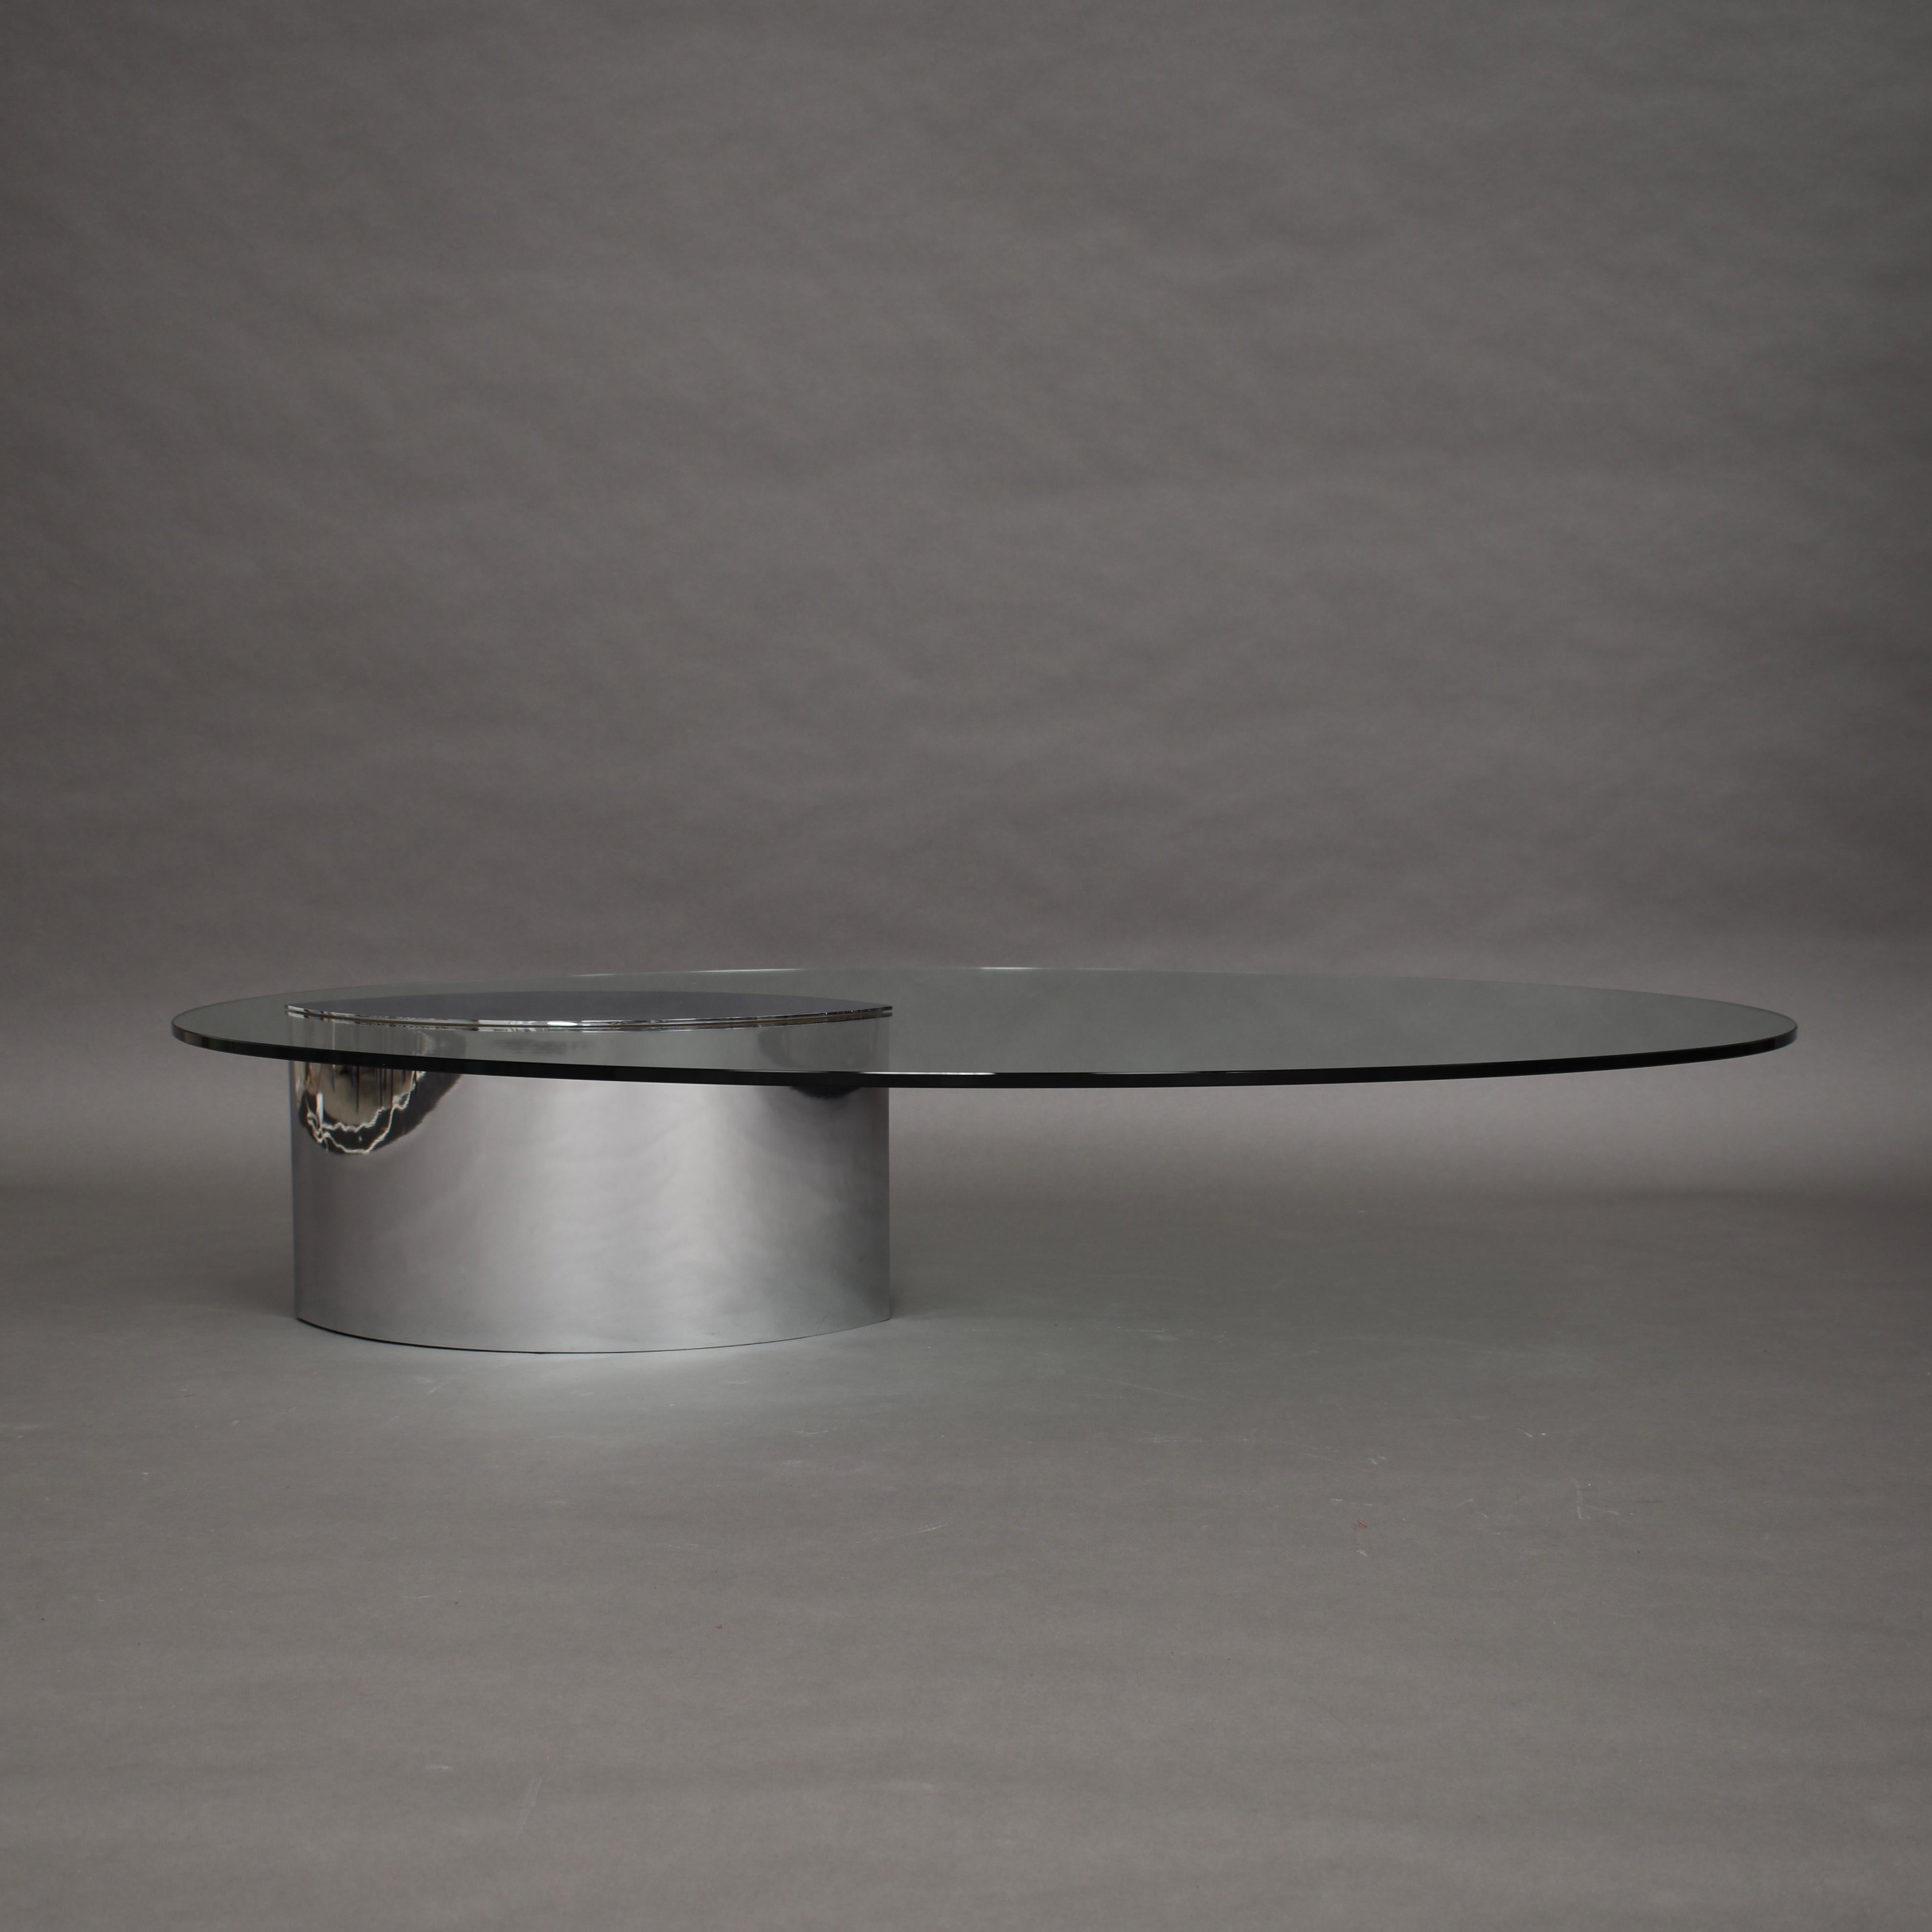 Cini Boeri coffee table in glass and chrome for GAVINA, Italy, circa 1970.

The glass top is kept in place by a chromed metal cover that is attached through holes in the glass onto the chromed base. The base has a heavy counter weight inside which